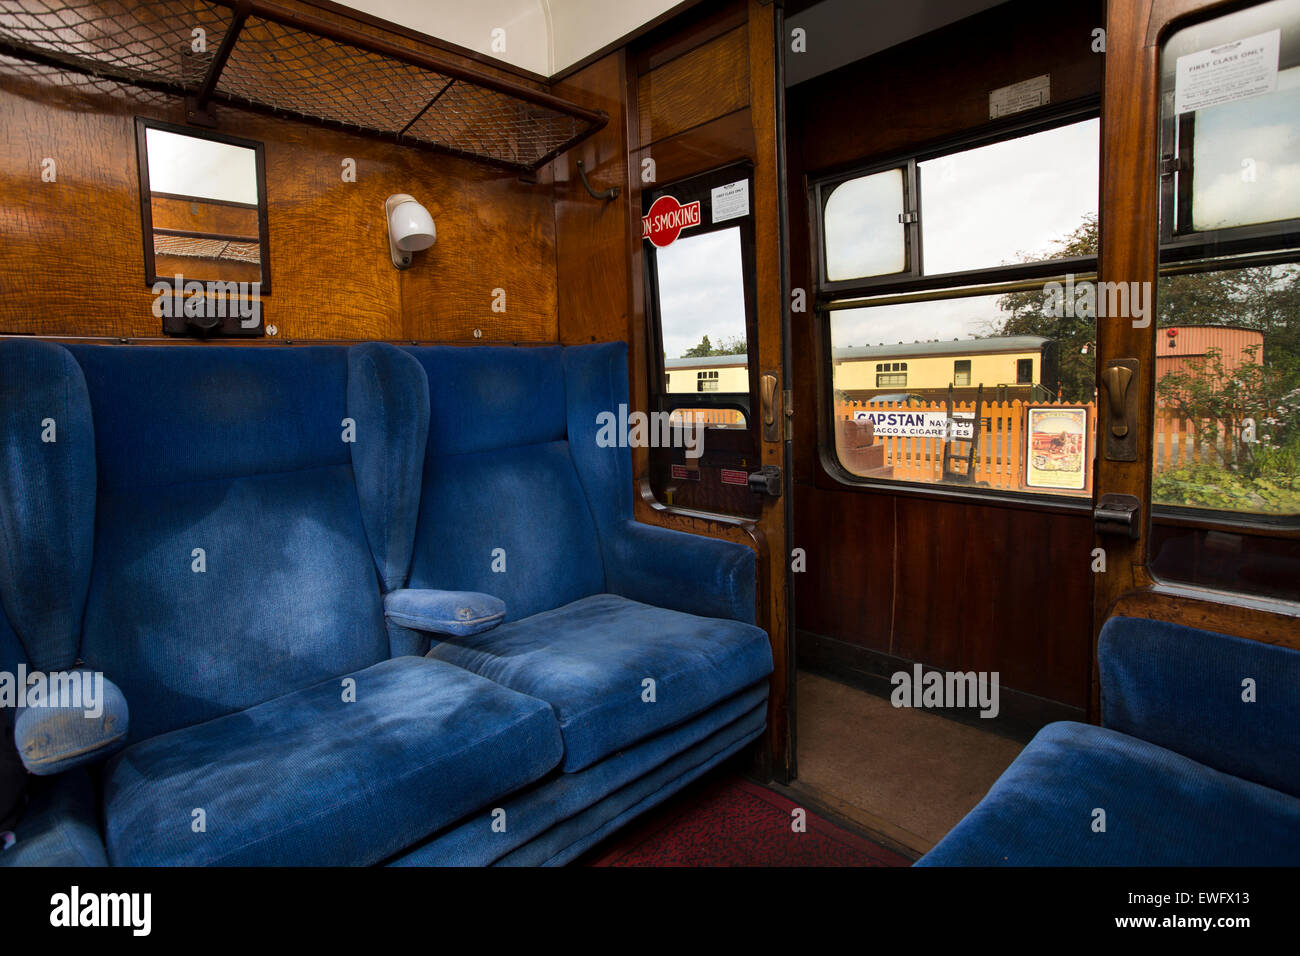 UK, England, Shropshire, Arley, Severn Valley Railway, first class carriage interior Stock Photo